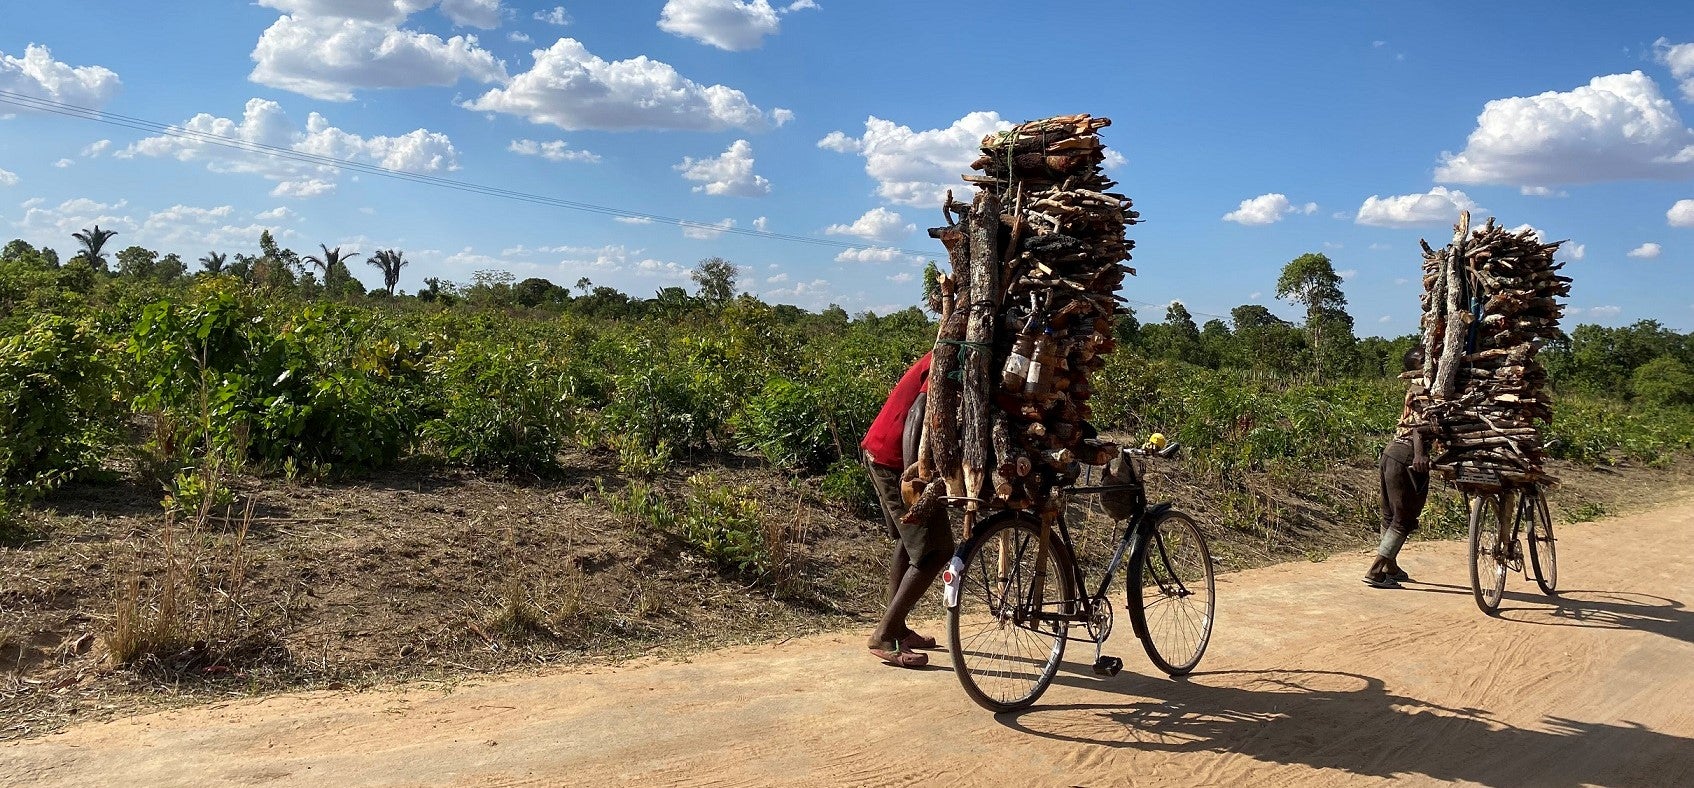 Firewood traders from Ndzalanyama forest in Malawi